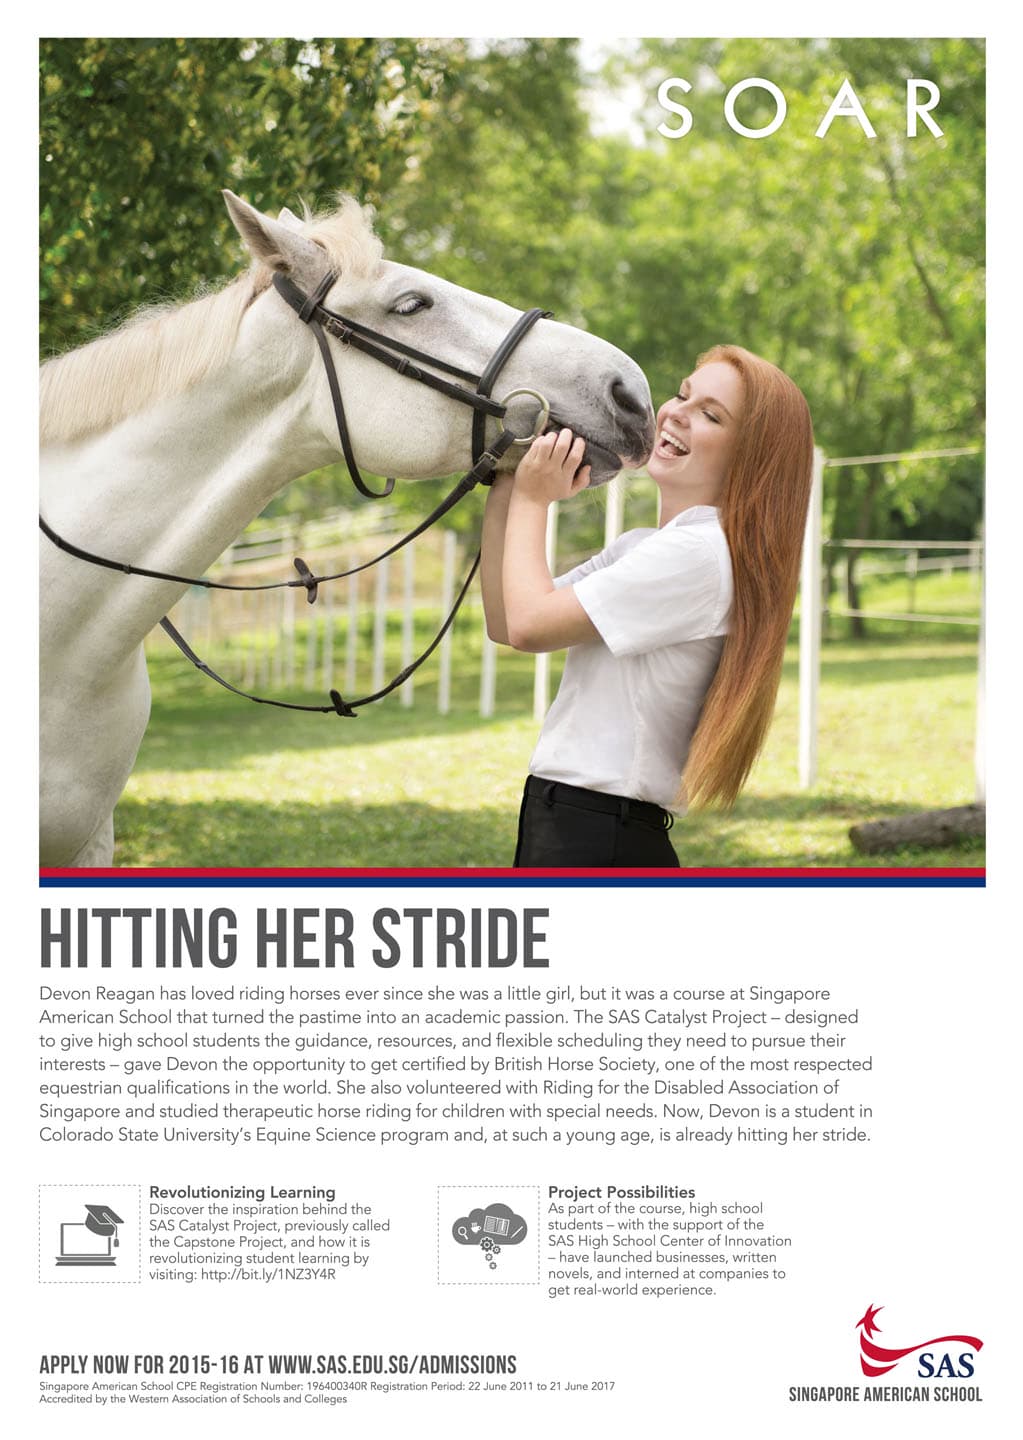 03 - SCOTT A WOODWARD - Soar Ad 2014 - Equine Therapy